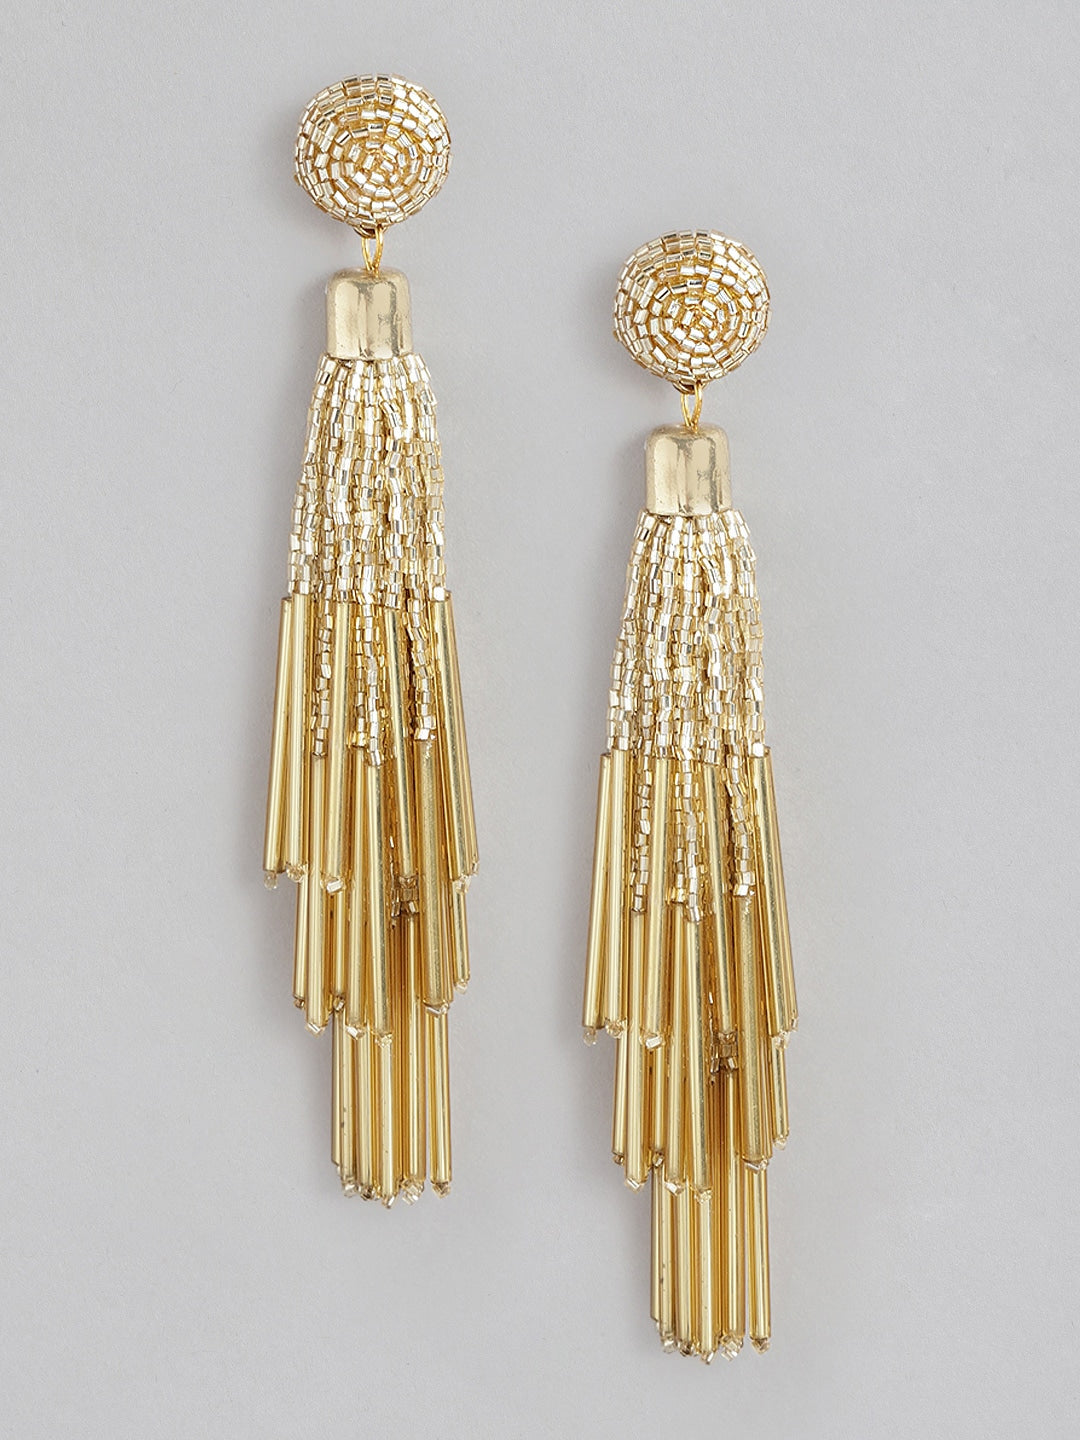 RICHEERA Gold-Plated Artificial Beads Contemporary Drop Earrings